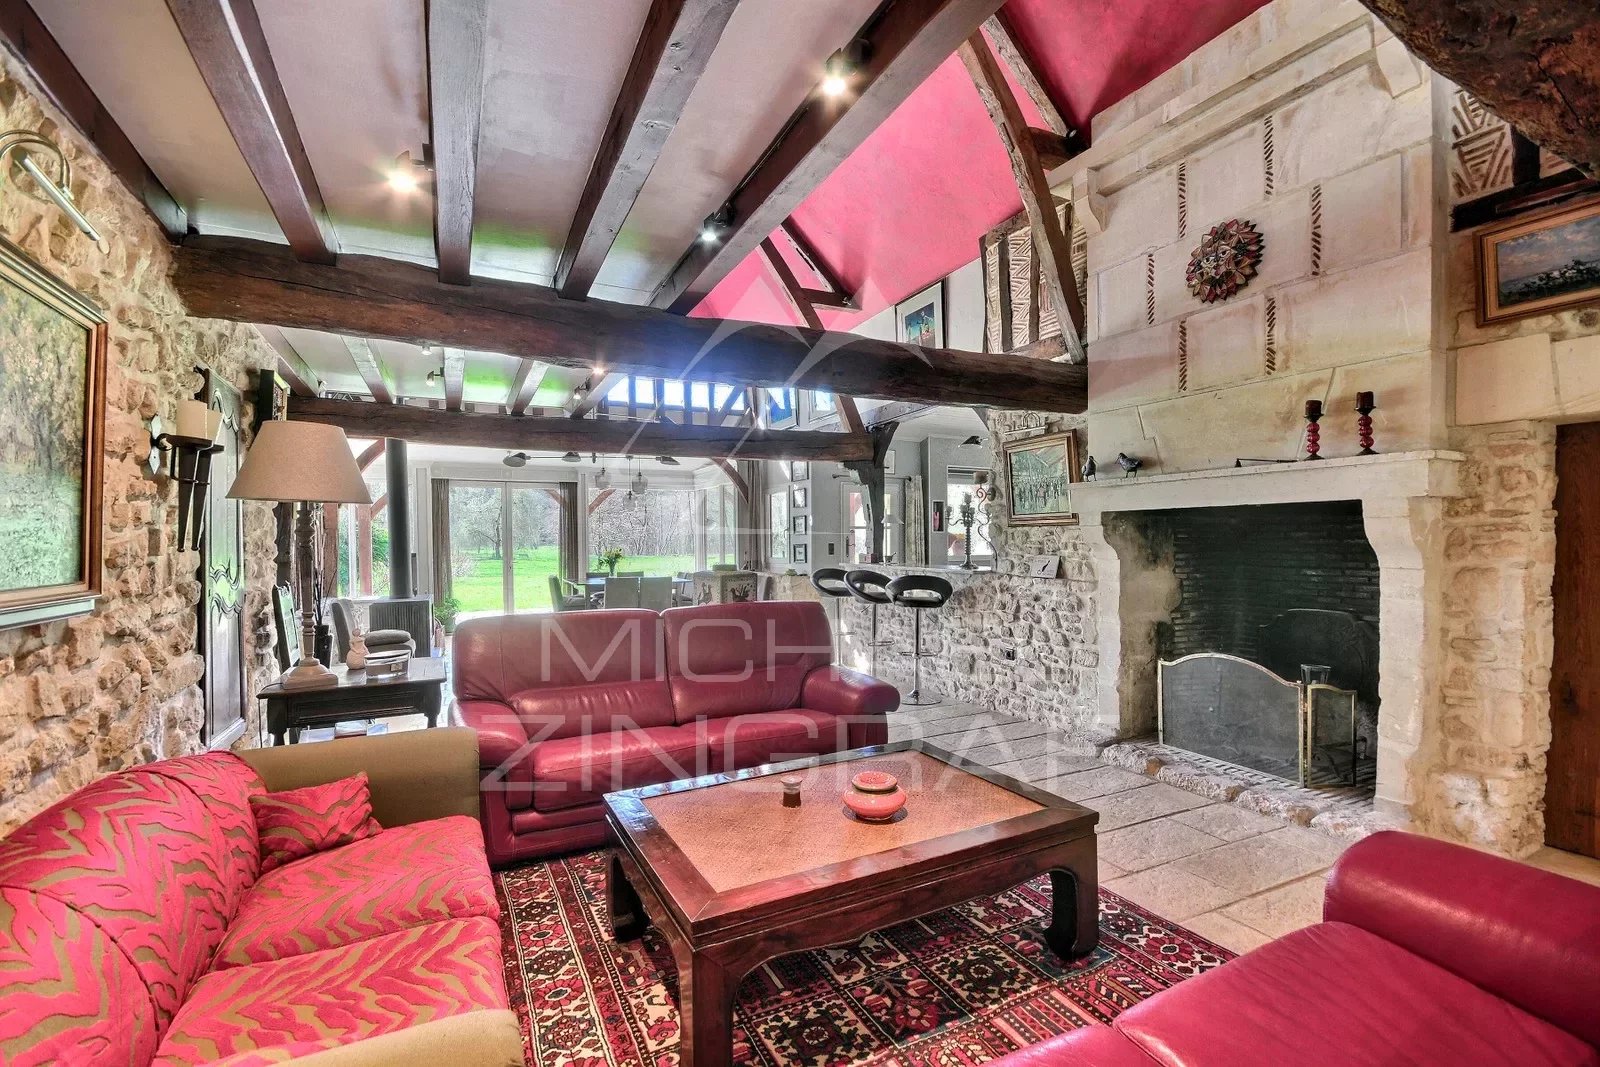 Equestrian property in the Pays d'Auge.